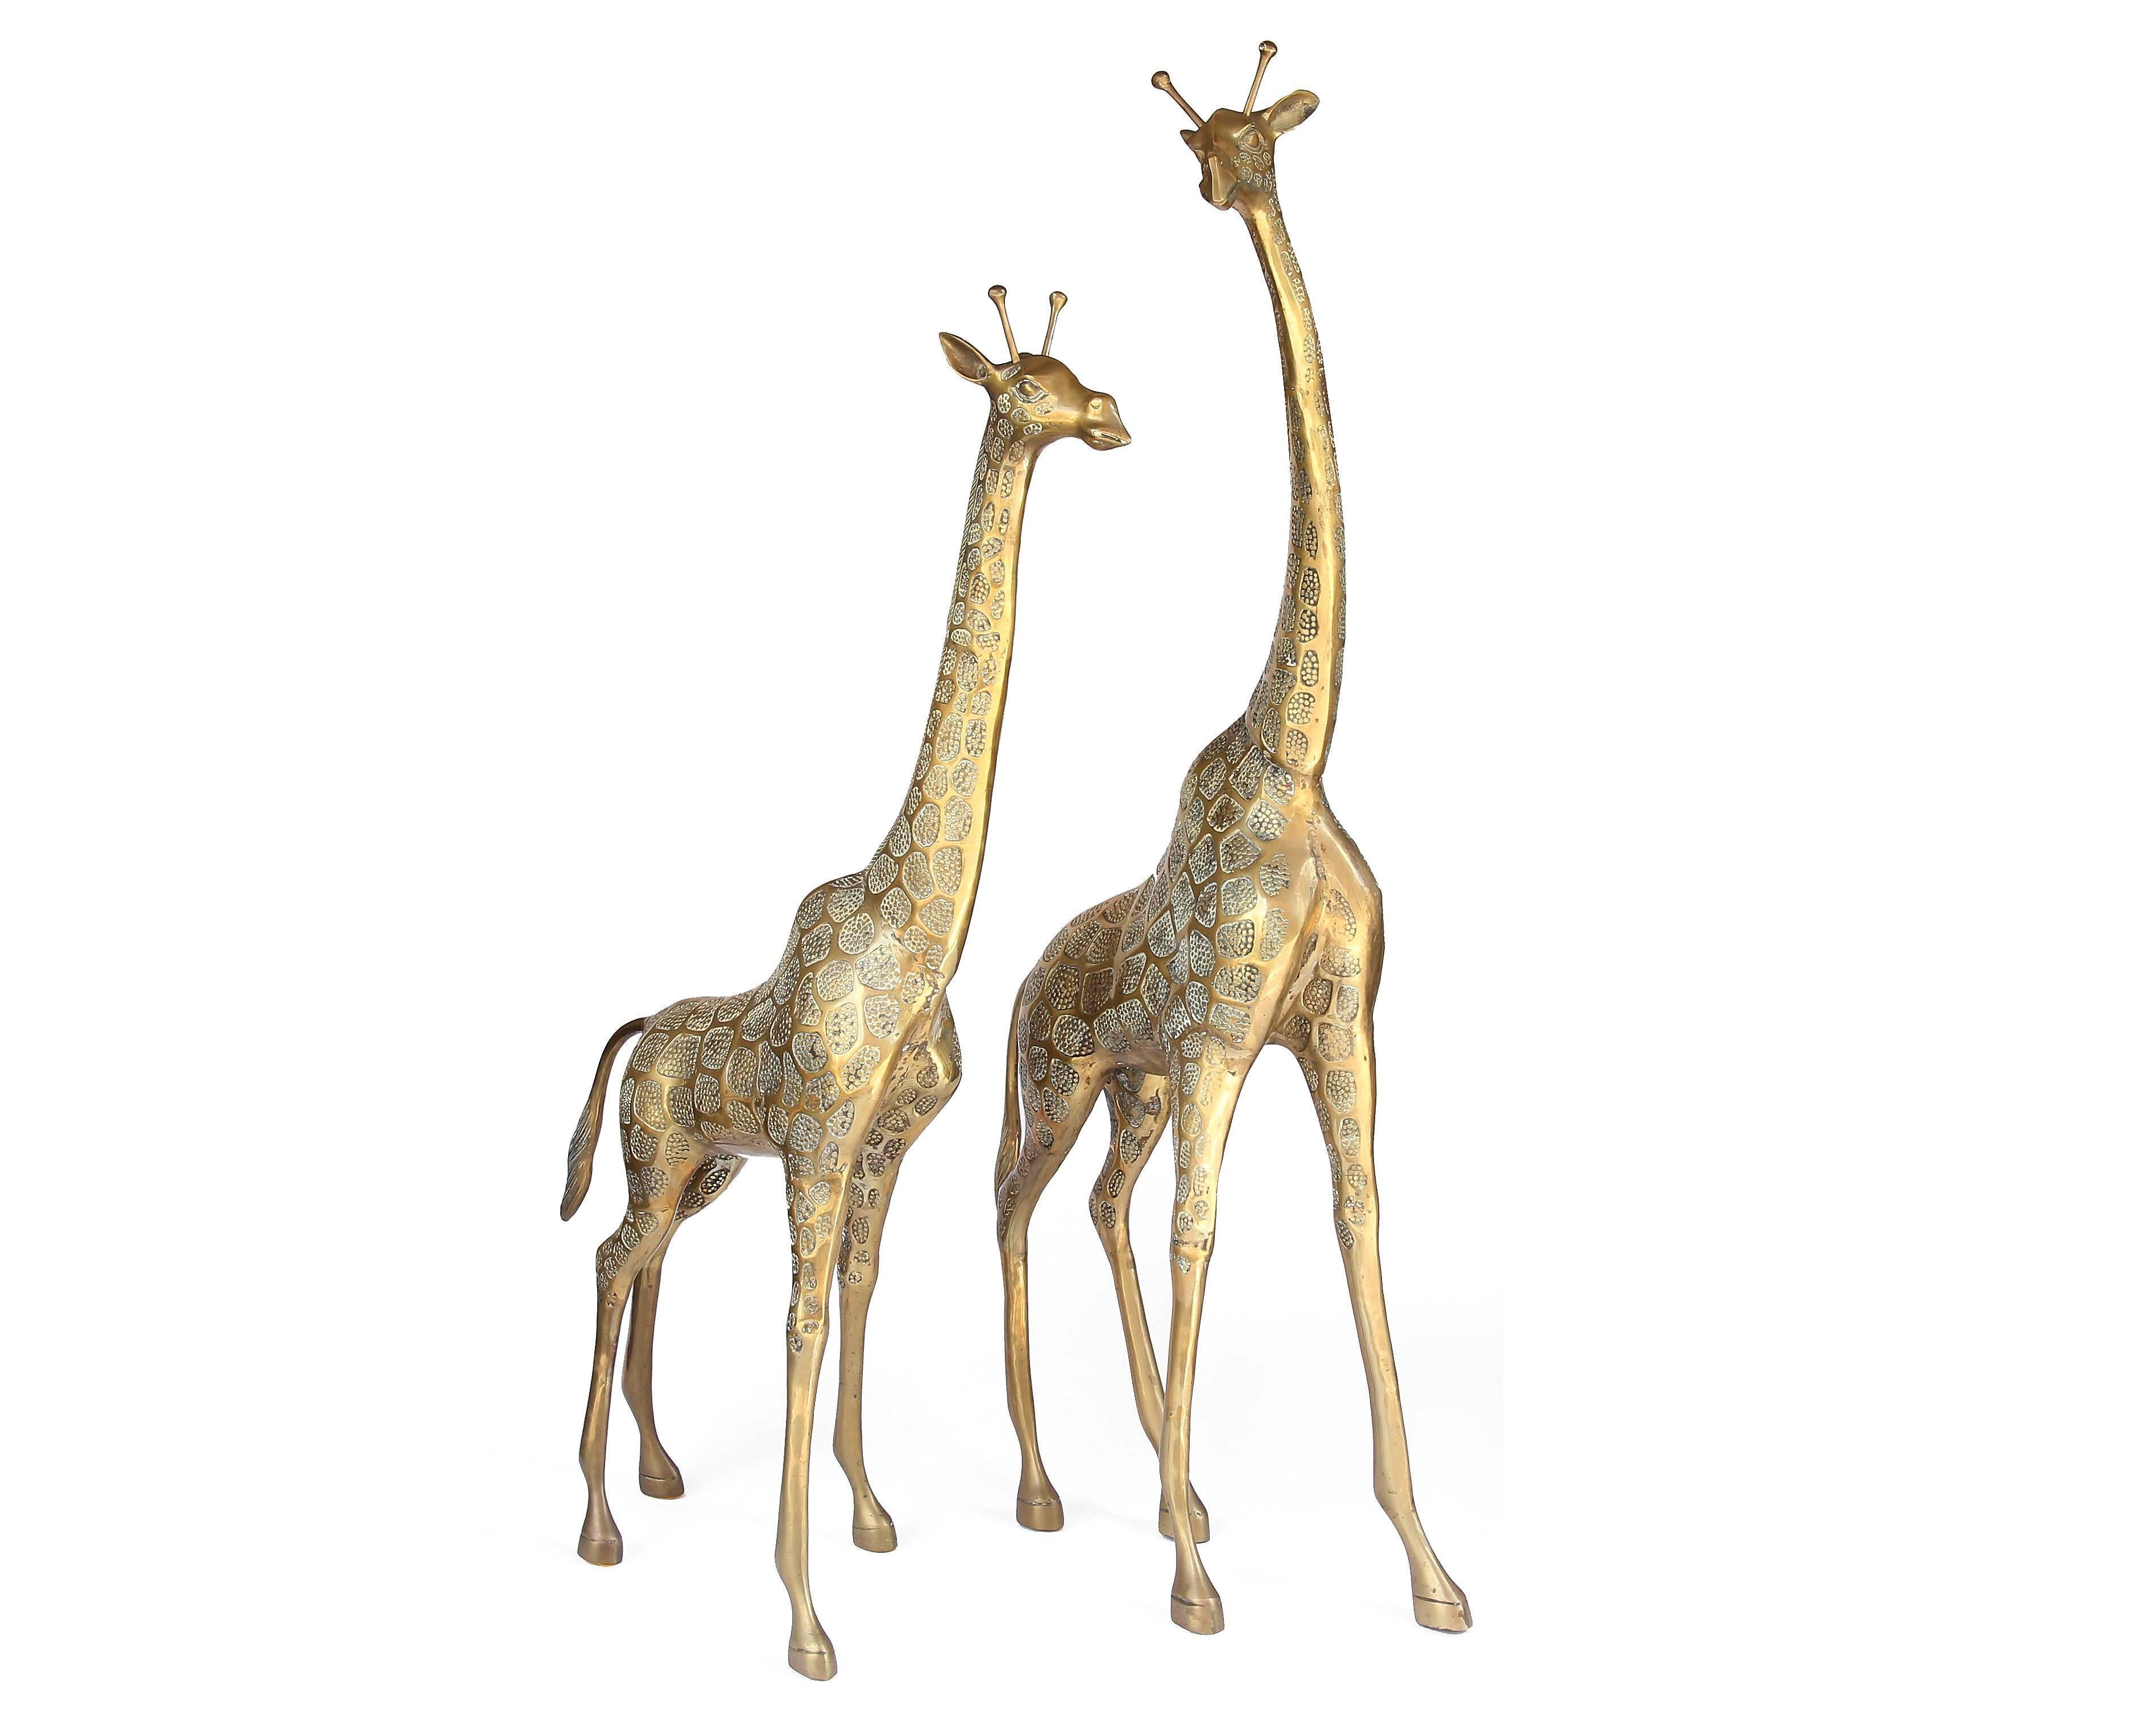 This beautifully detailed pair of brass giraffes add a touch of Hollywood Regency style to any space. As you can see from the photos, these pieces were cast in Fine detail and with expert craftsmanship. The giraffes have a beautiful vintage brass